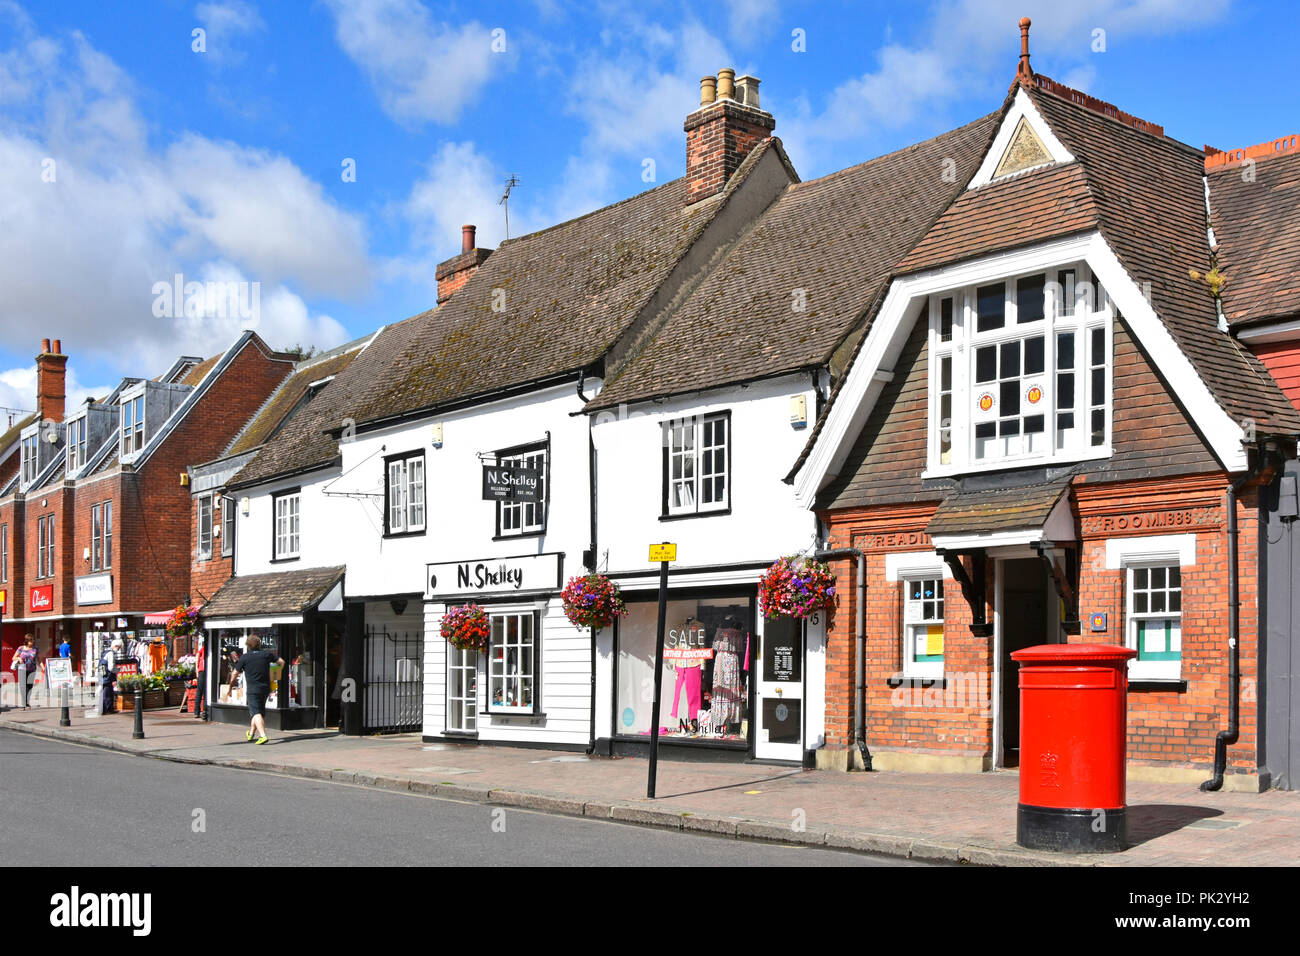 Billericay shopping high street with small retail business shop front window display & historic gable end reading room facade of 1886 Essex England UK Stock Photo